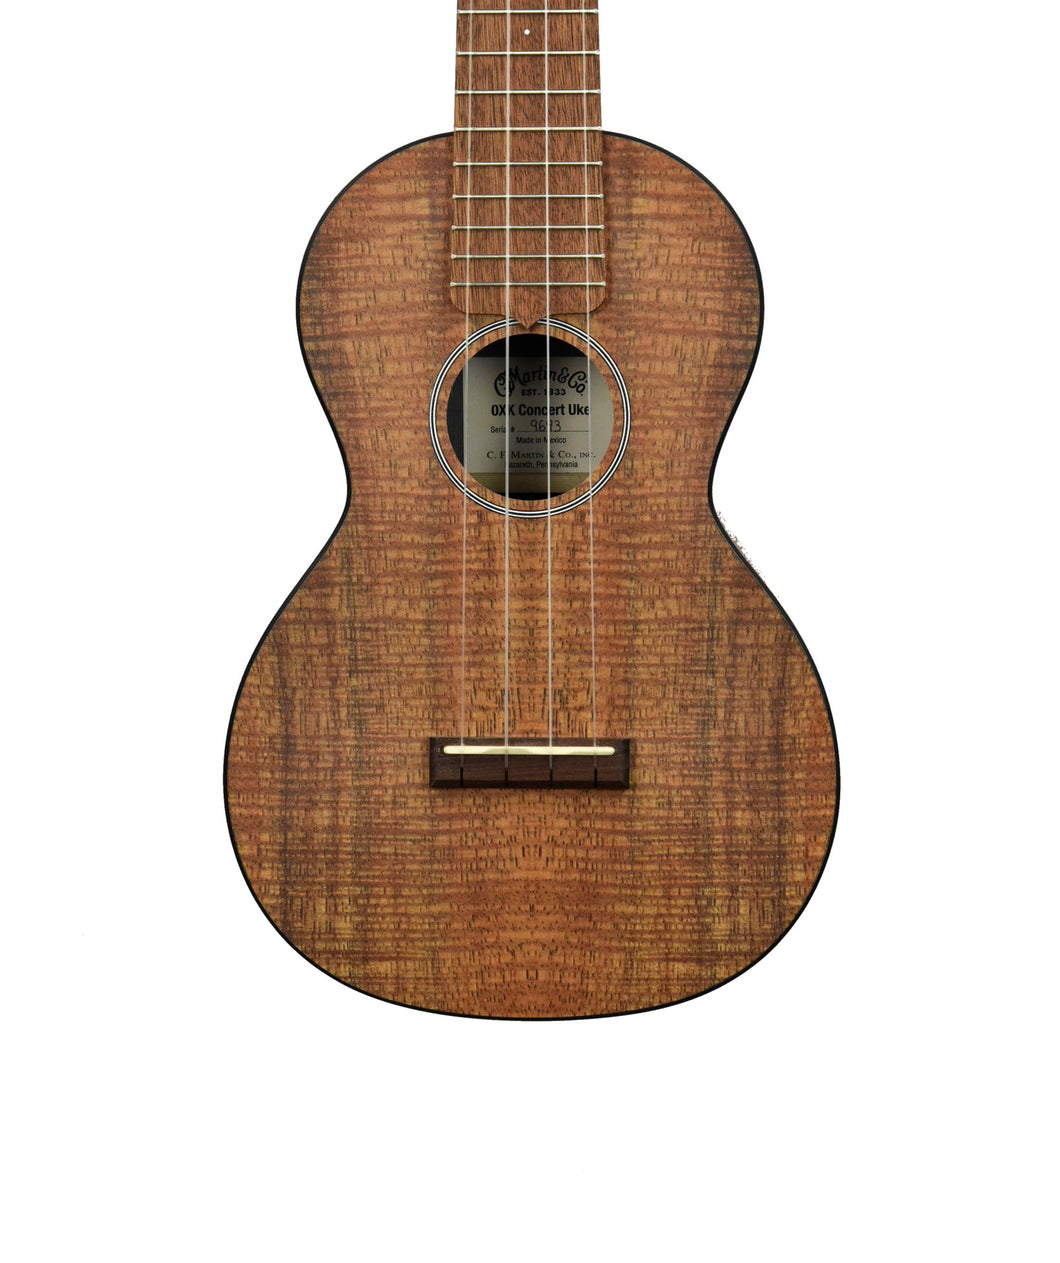 Martin OXK Concert Ukulele in Natural 9693 - The Music Gallery